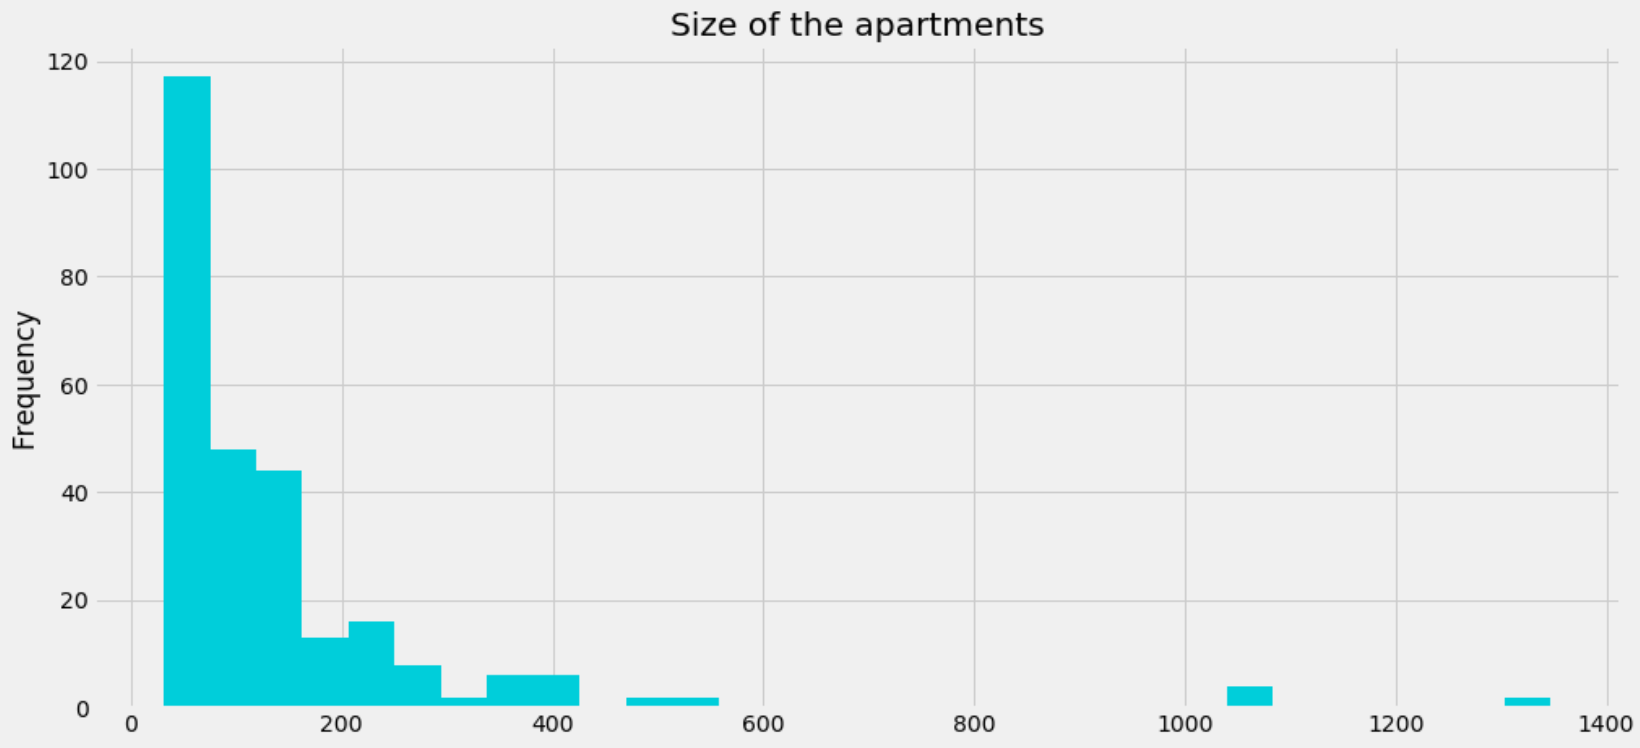 Histogram of sizes of apartments that are currently for sale in Vienna